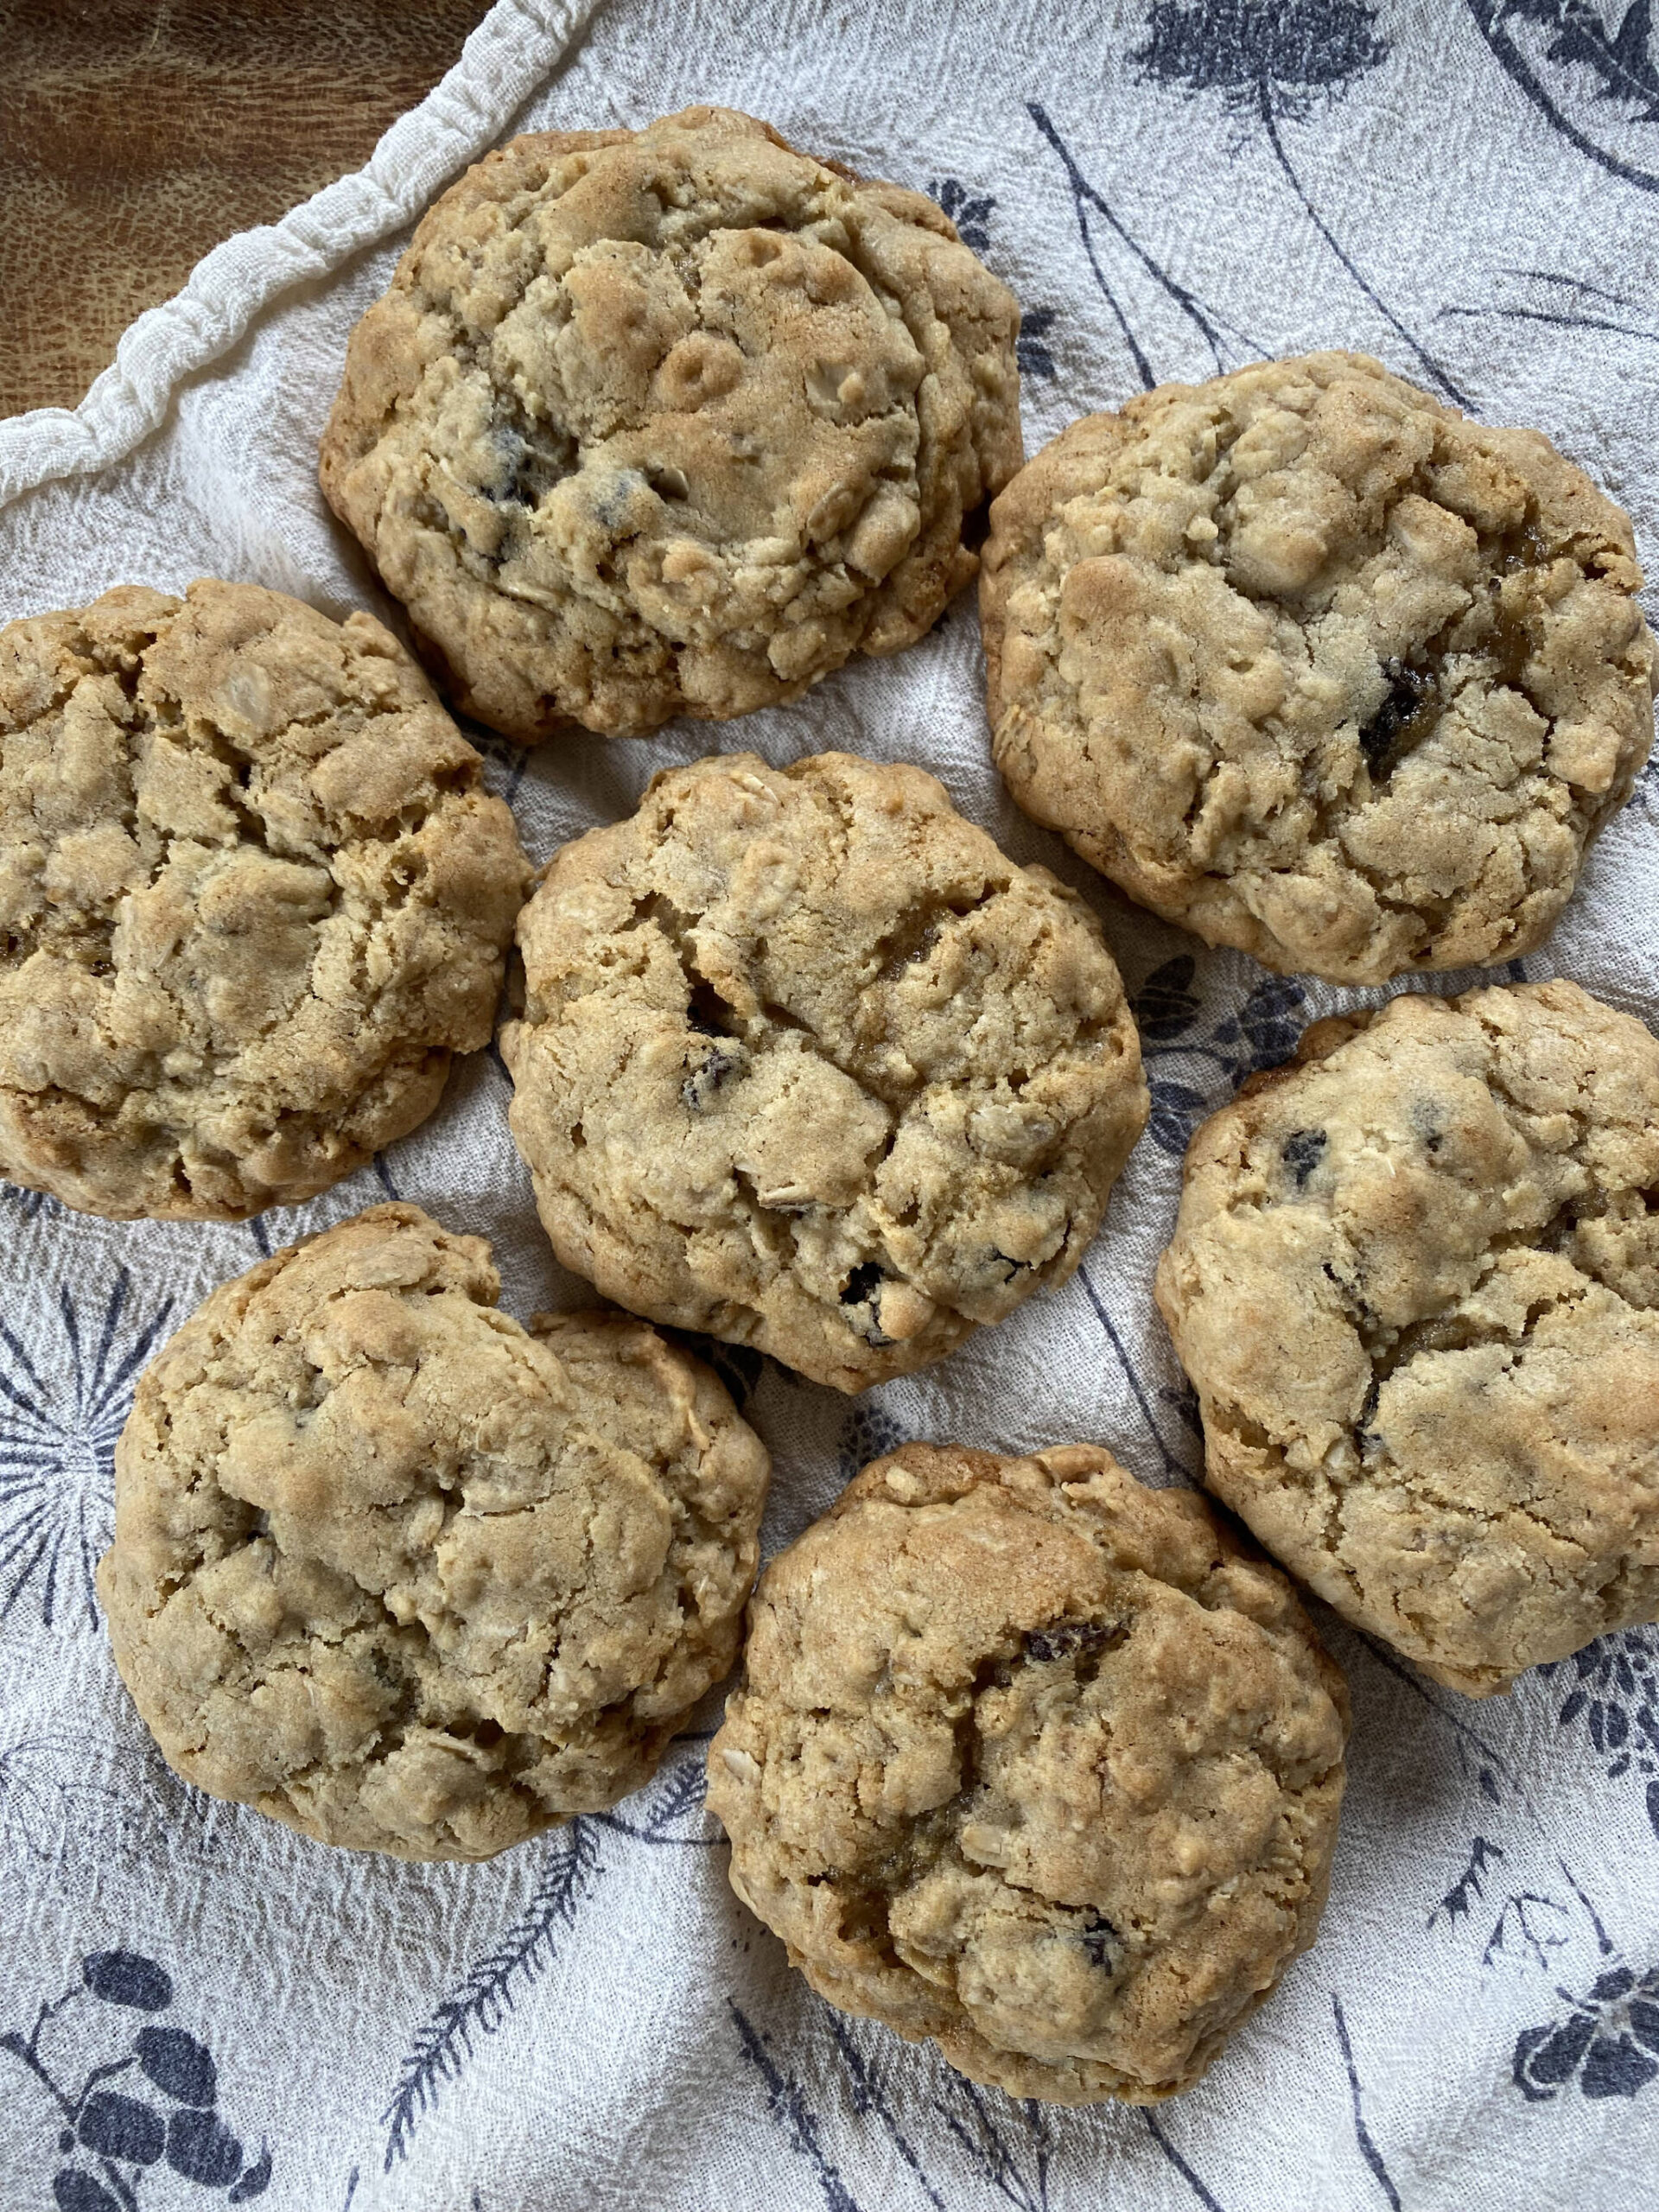 Oatmeal raisin cookies to celebrate a one-year anniversay. (Photo by Tressa Dale/Peninsula Clarion)